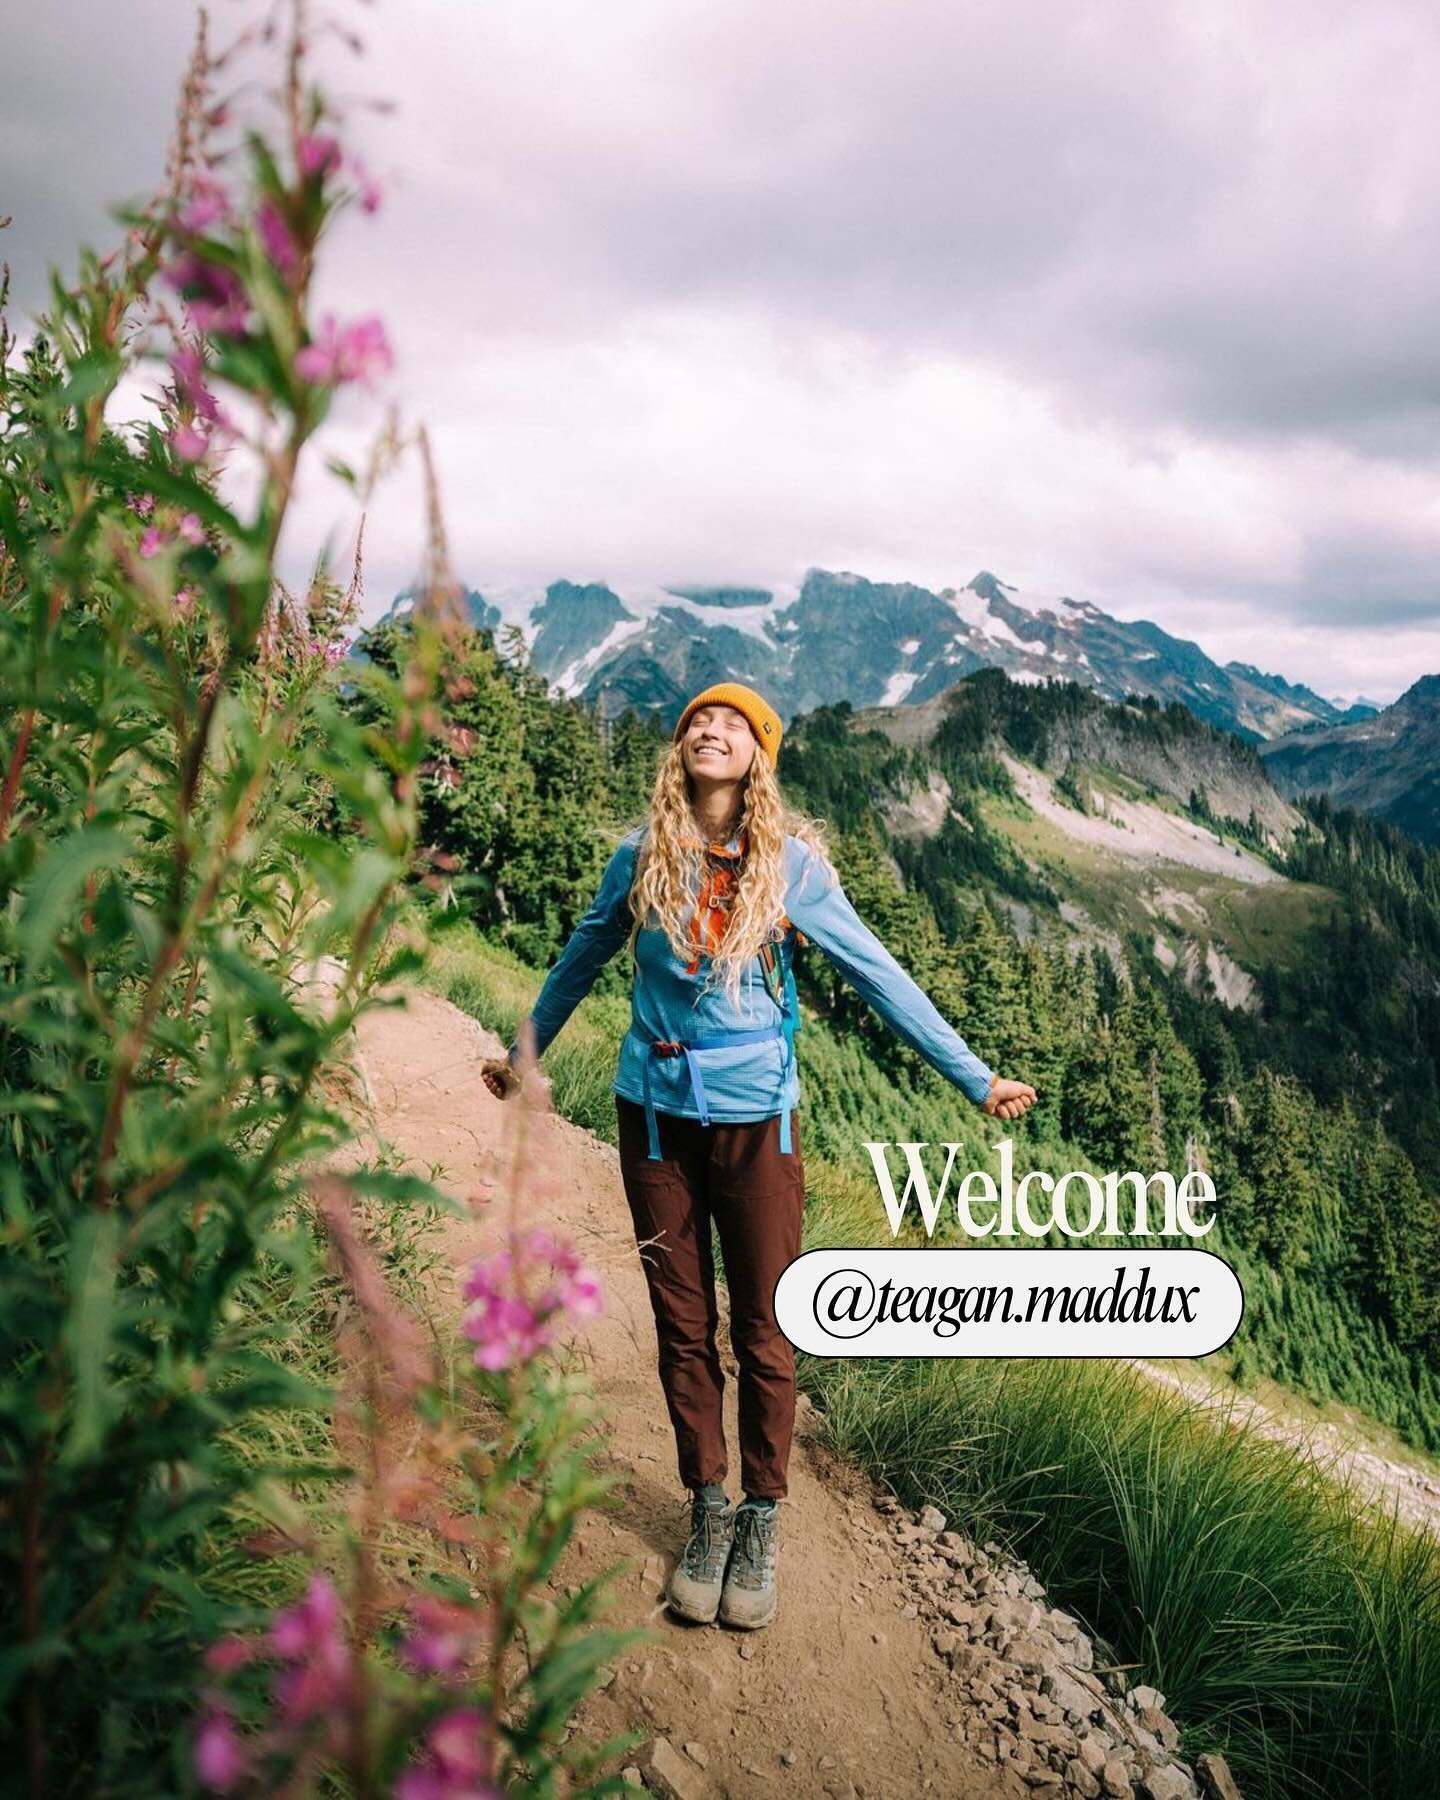 Meet @teagan.maddux ⛰️

Teagan is an adventure photographer and content creator who loves being outside as much as possible. She is currently living on the road full-time in a truck camper with her partner and their adventure cat, Moose. She loves to